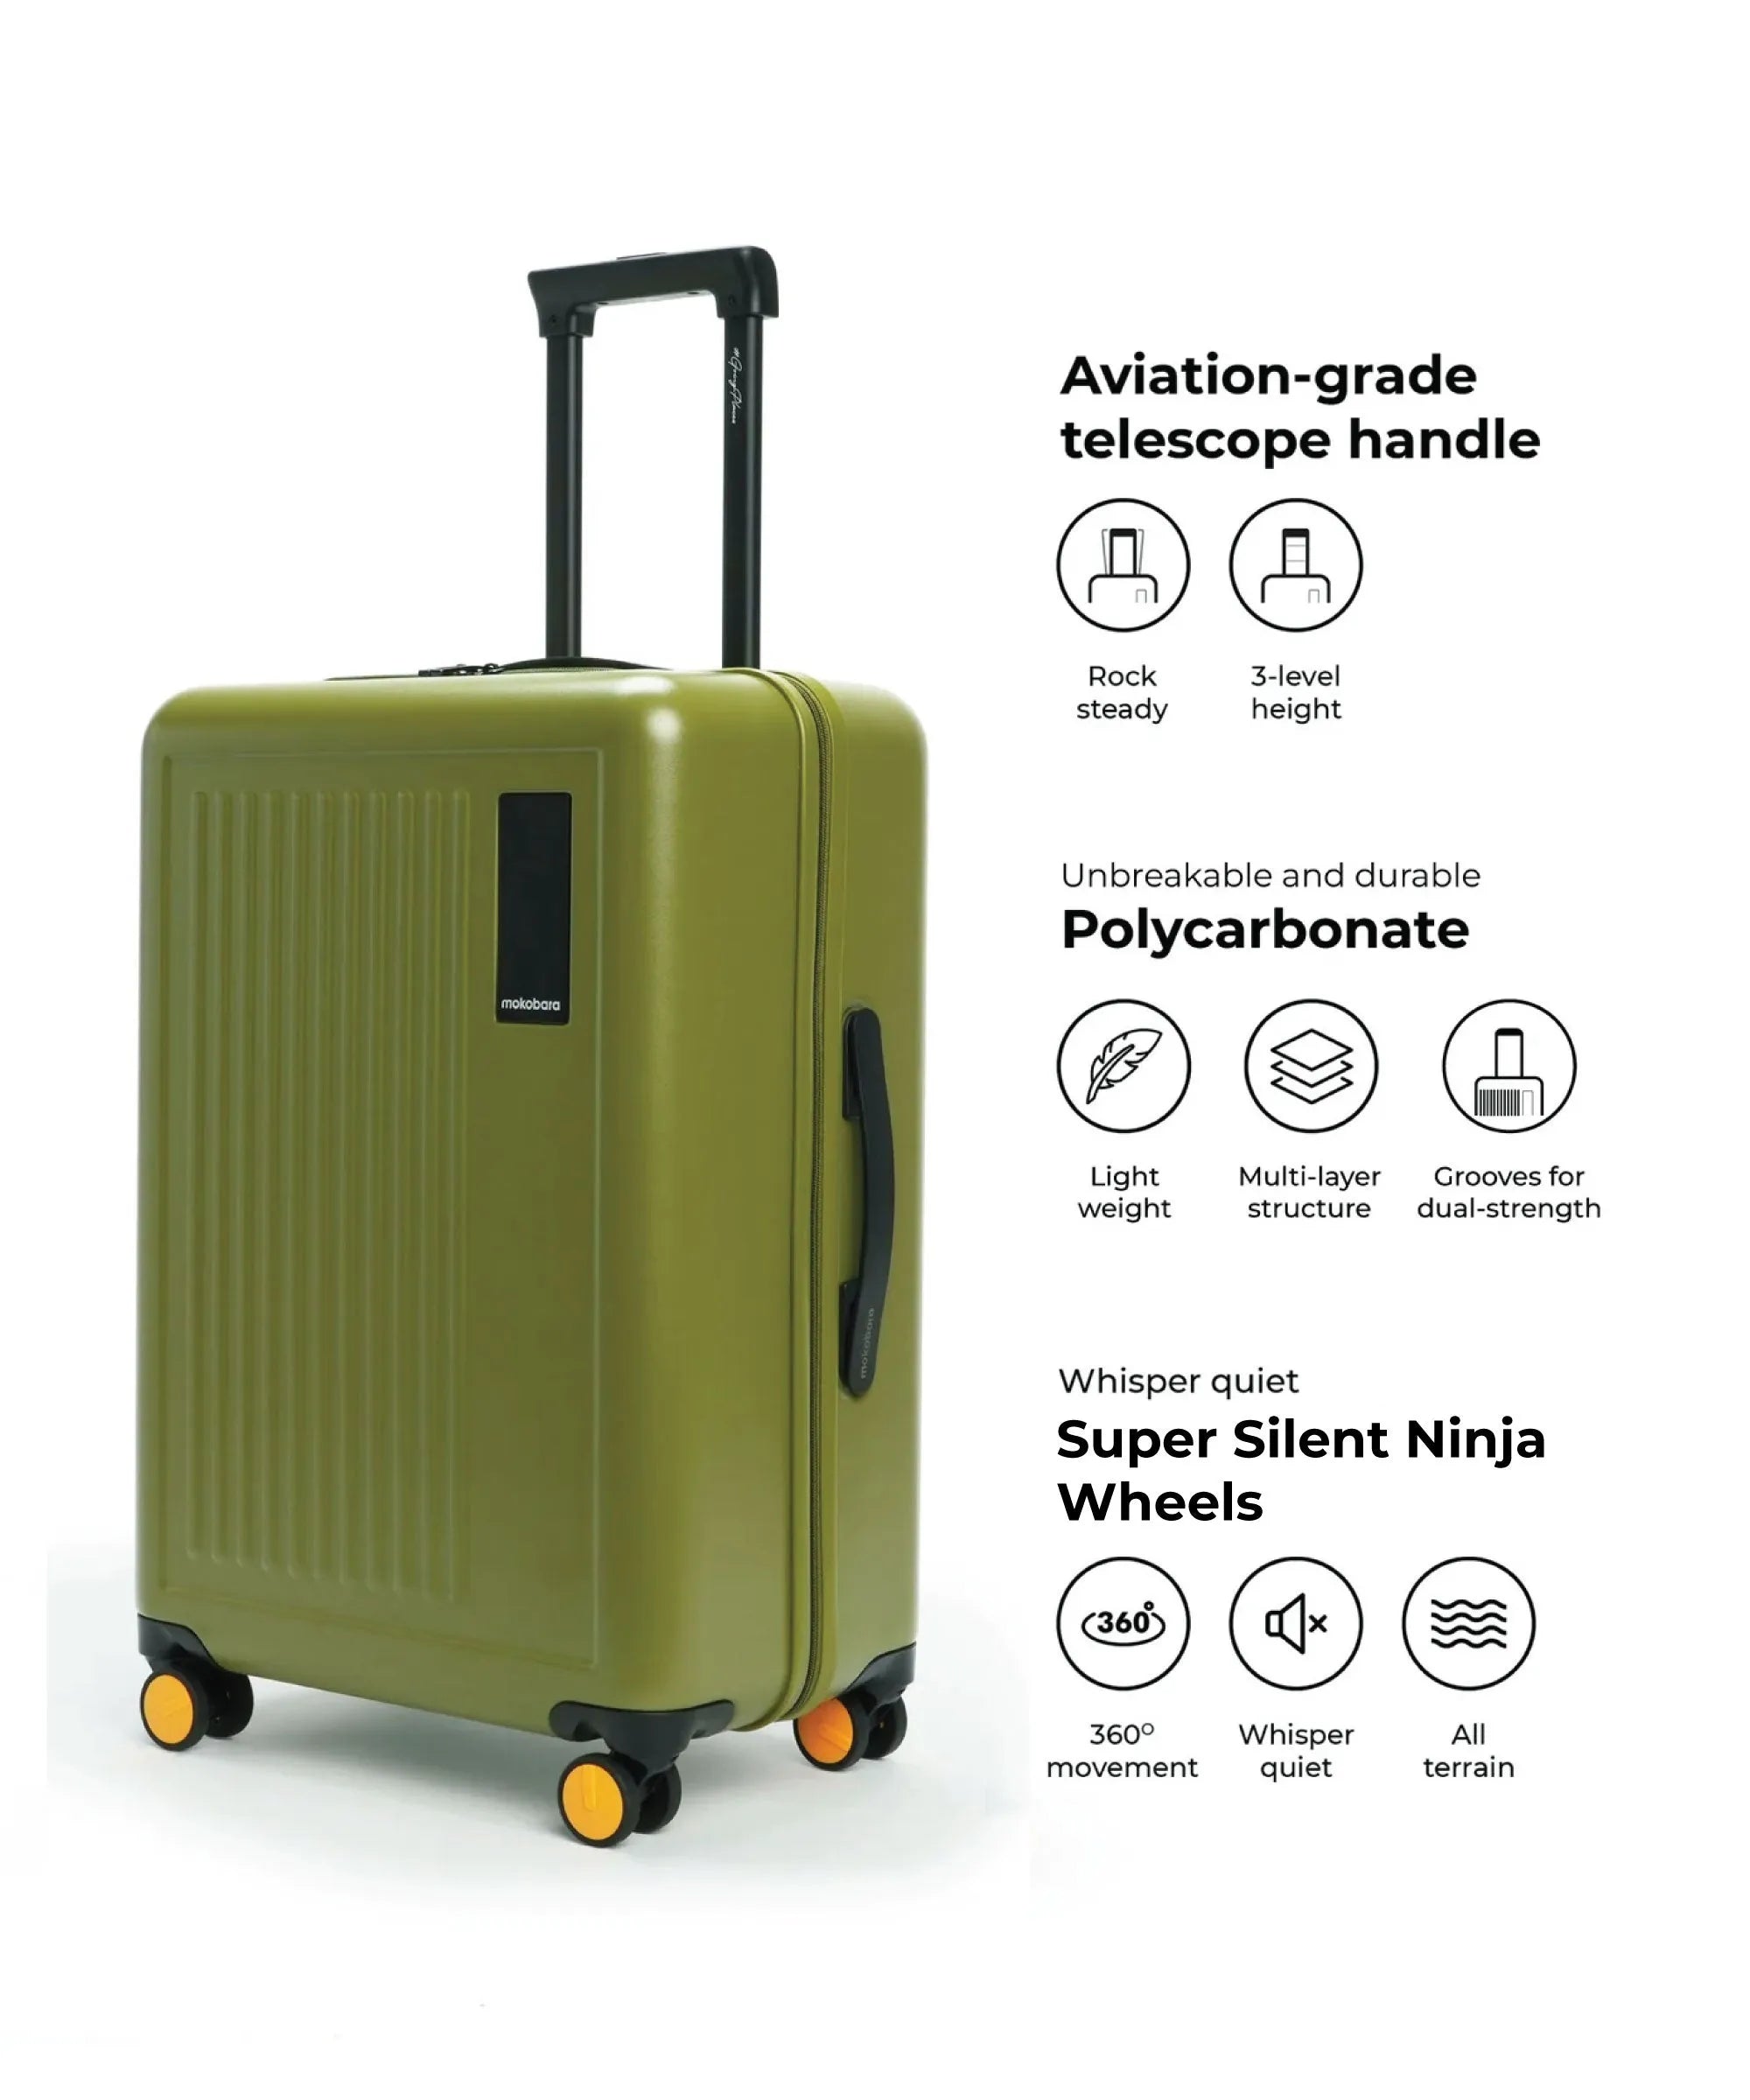 Color_ So Matcha | The Transit Luggage - Set of 2